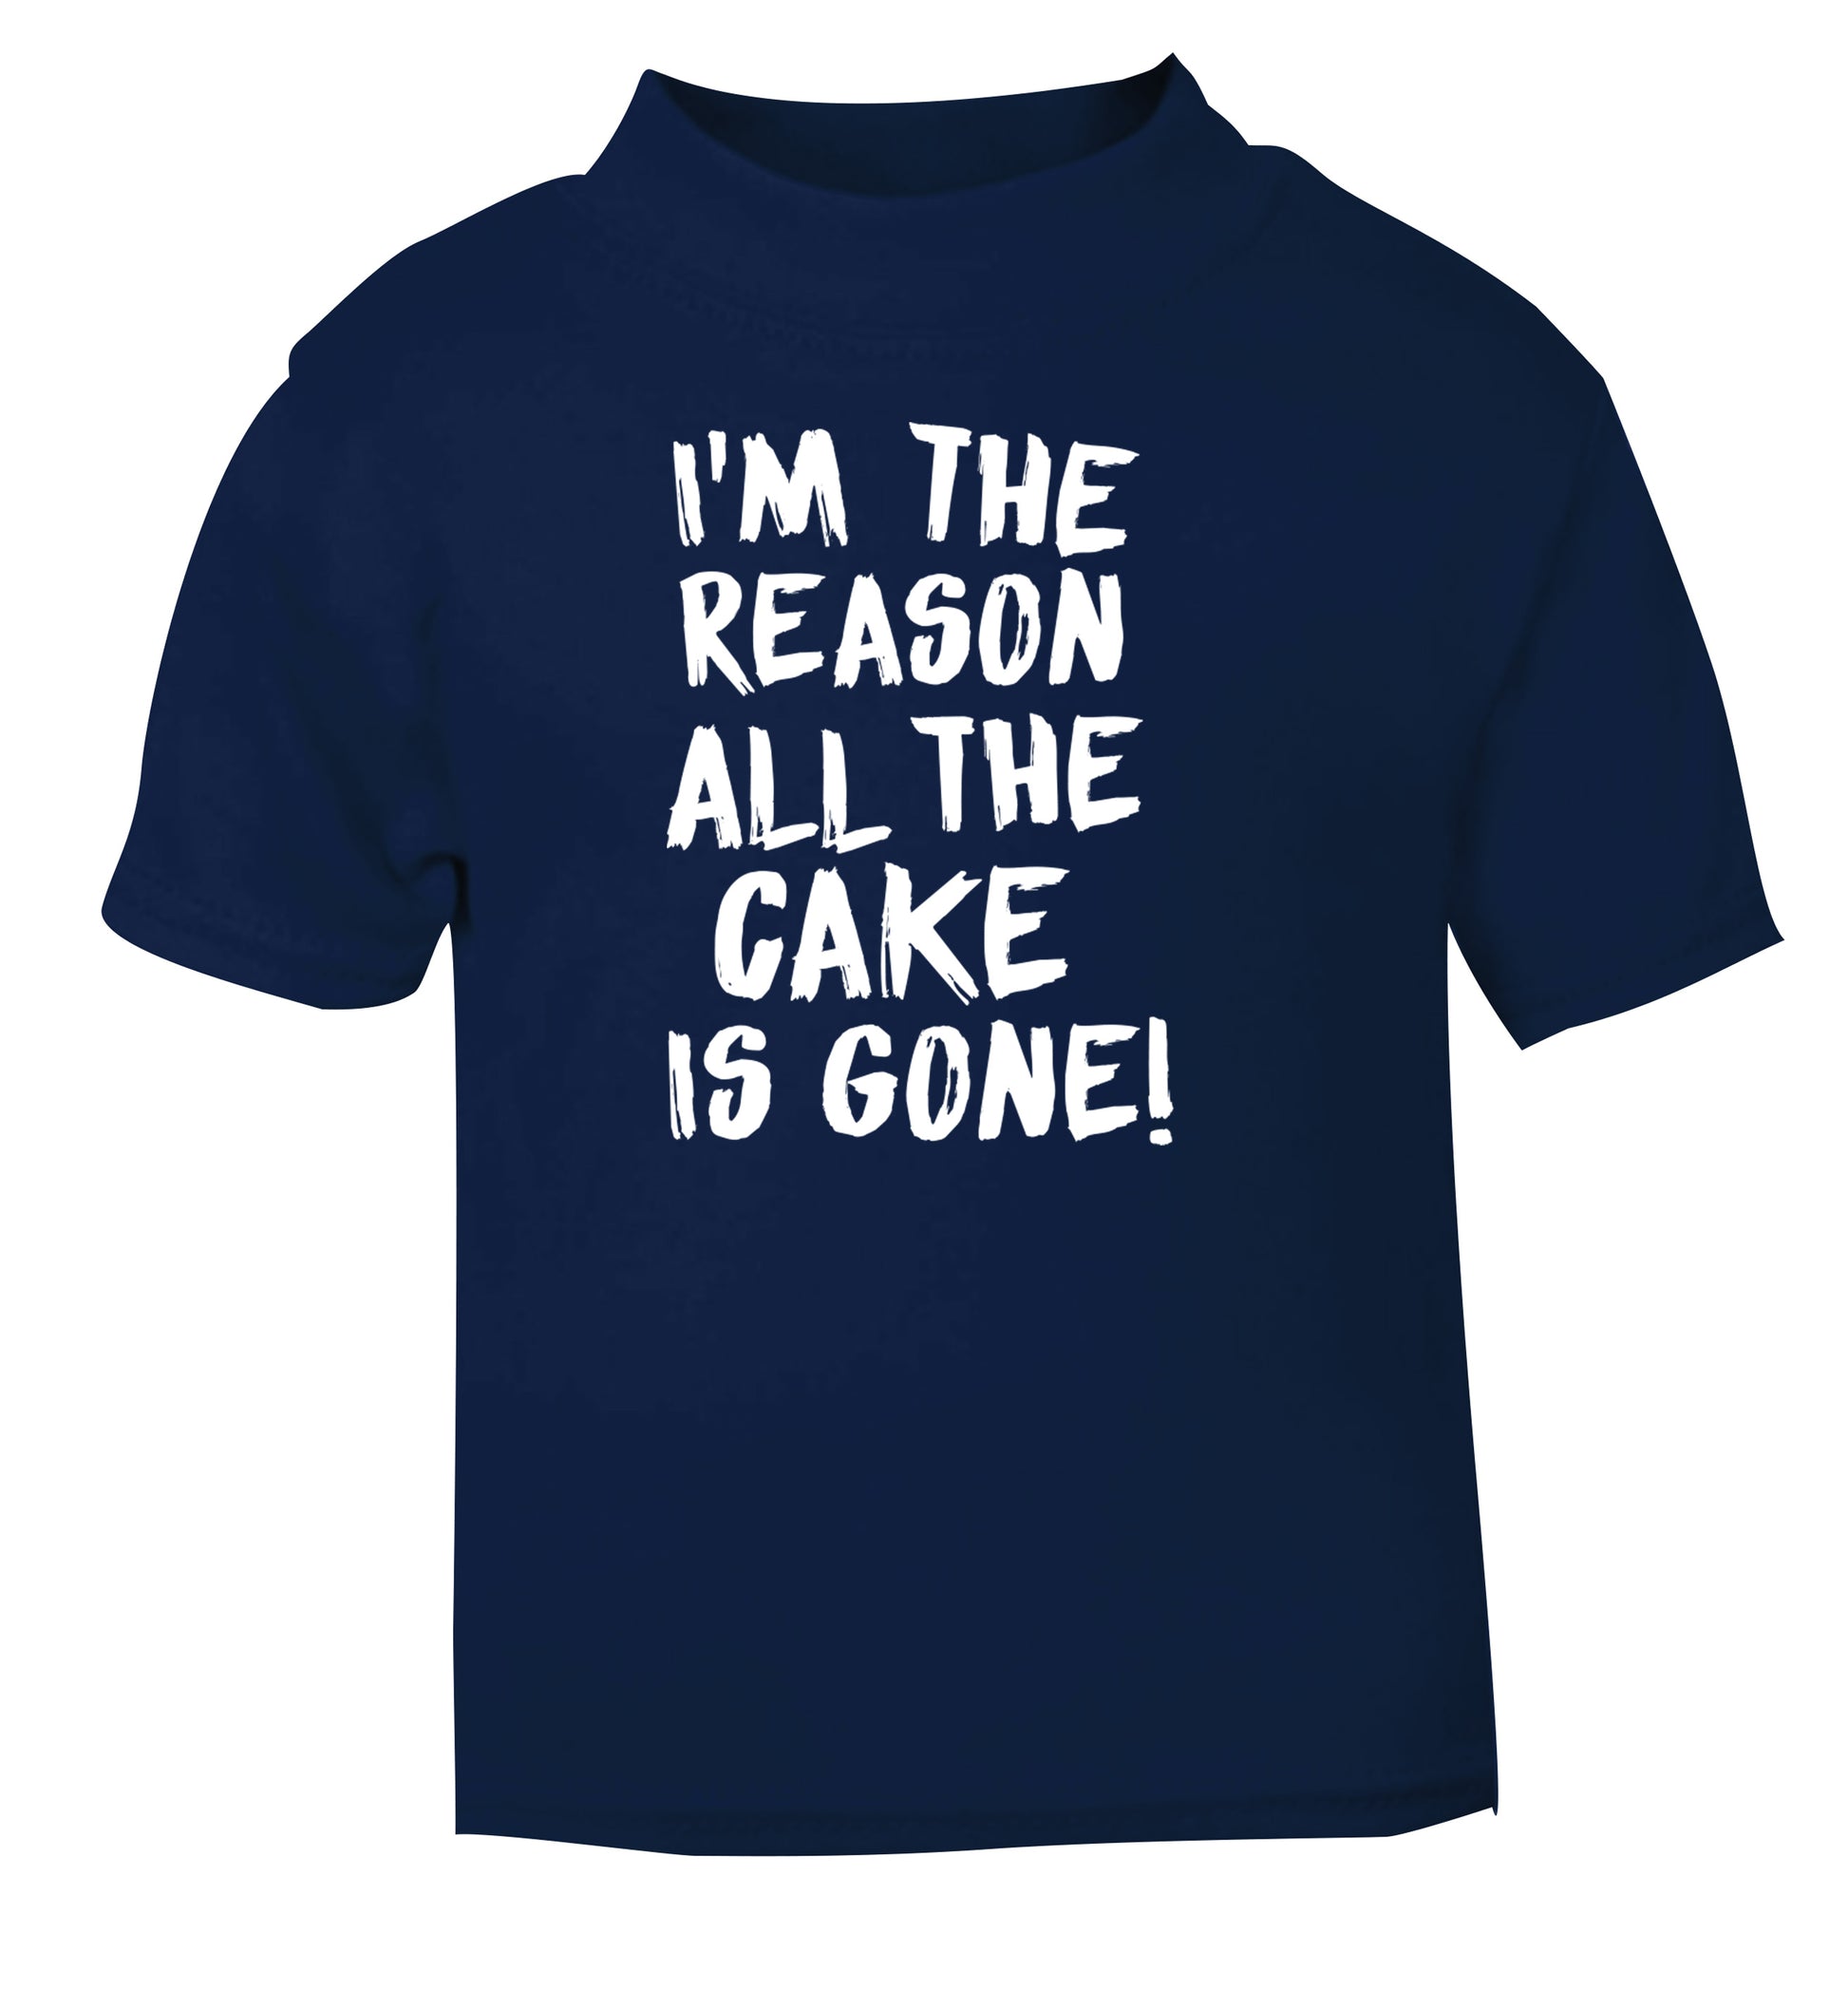 I'm the reason all the cake is gone navy Baby Toddler Tshirt 2 Years